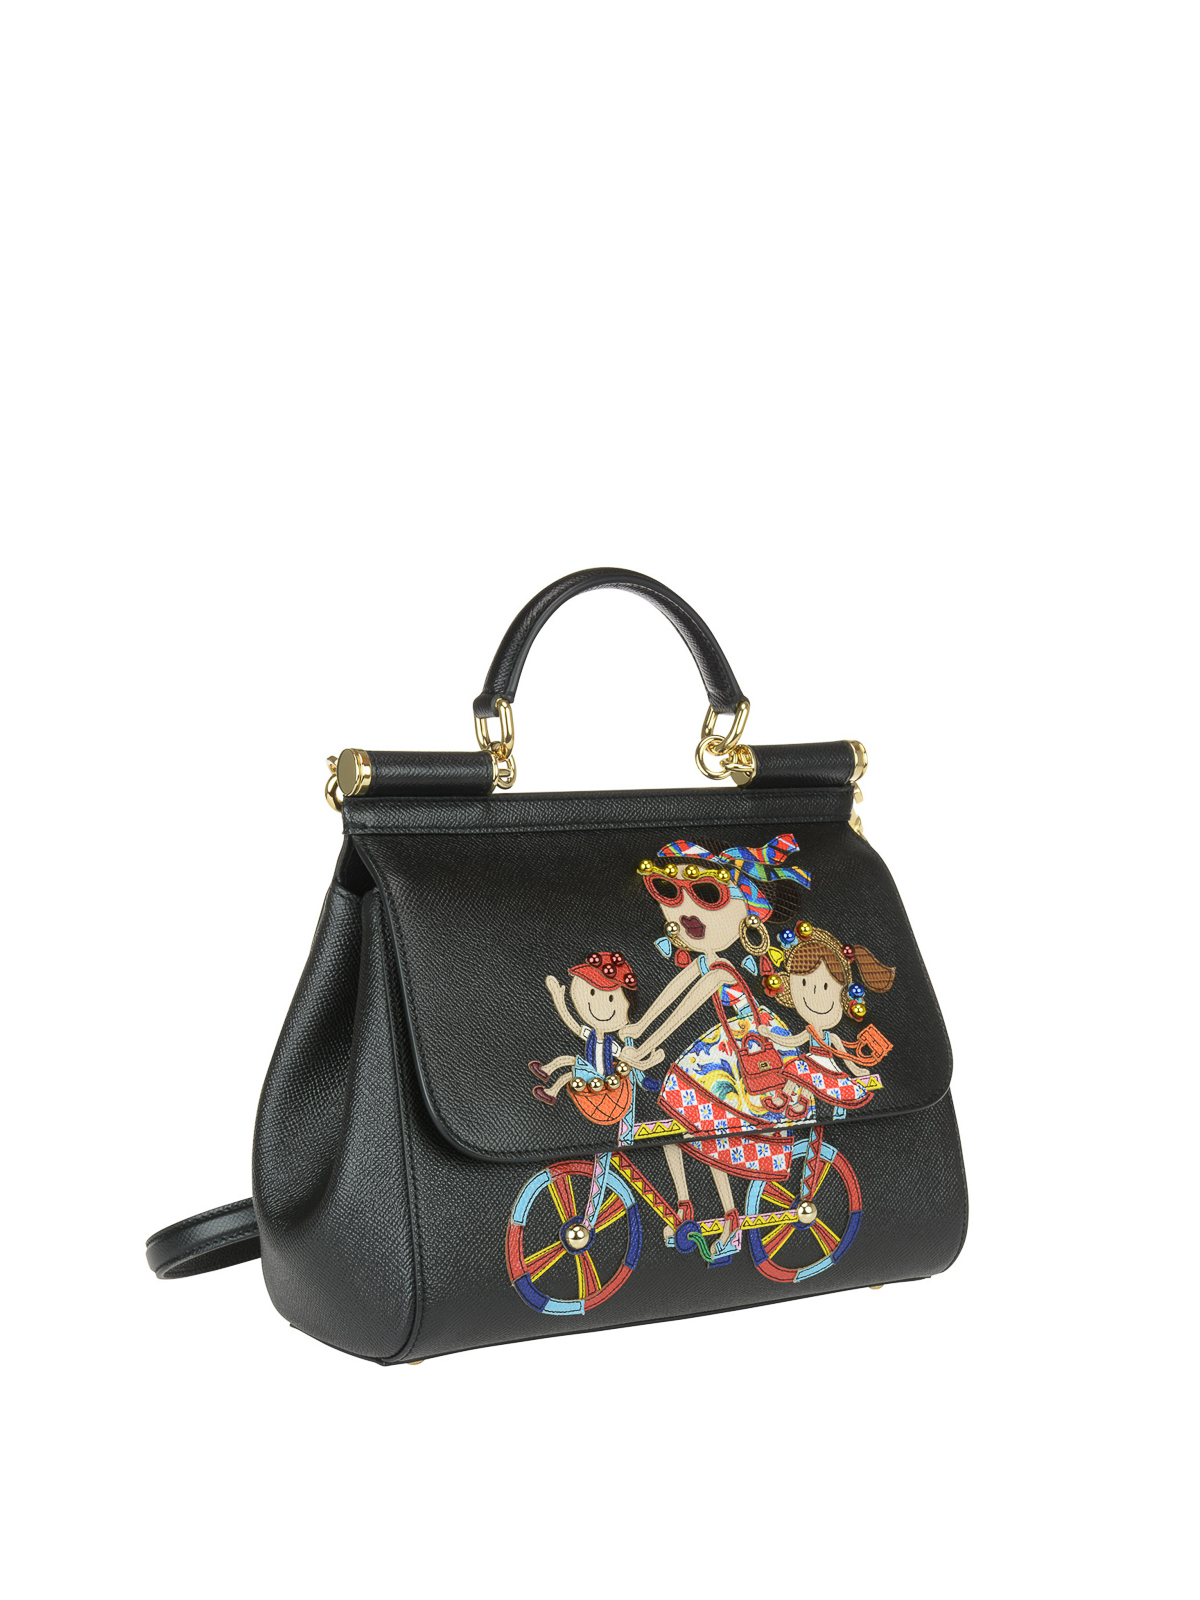 Totes bags Dolce & Gabbana - Medium Sicily bag with logo patch